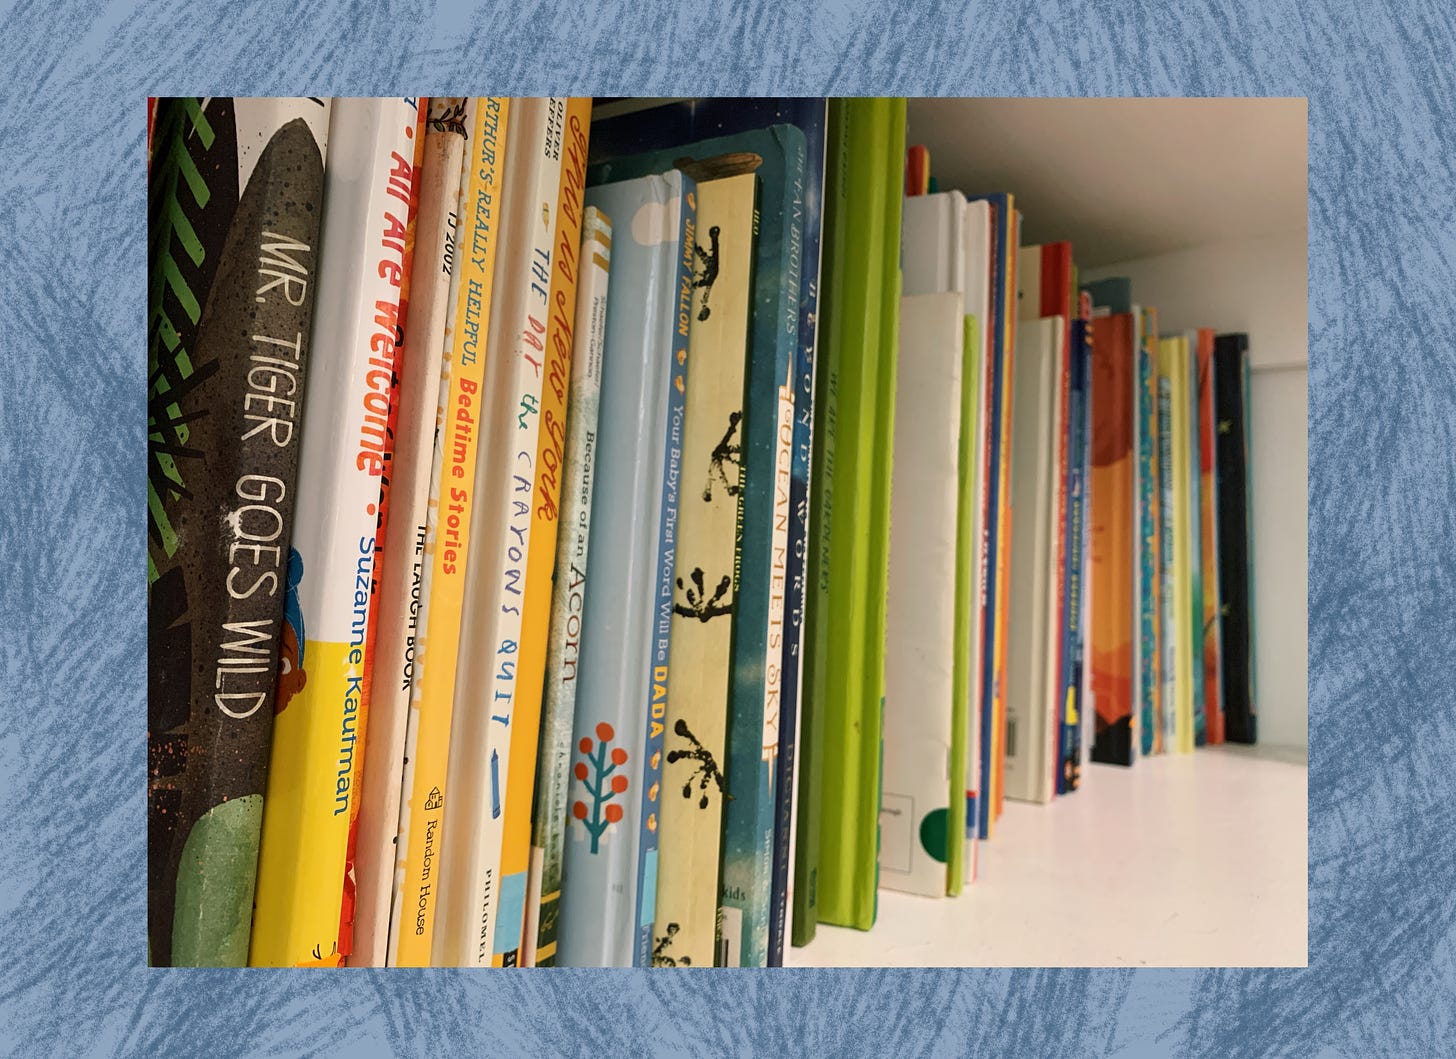 A shelf of children's books from the author's collection